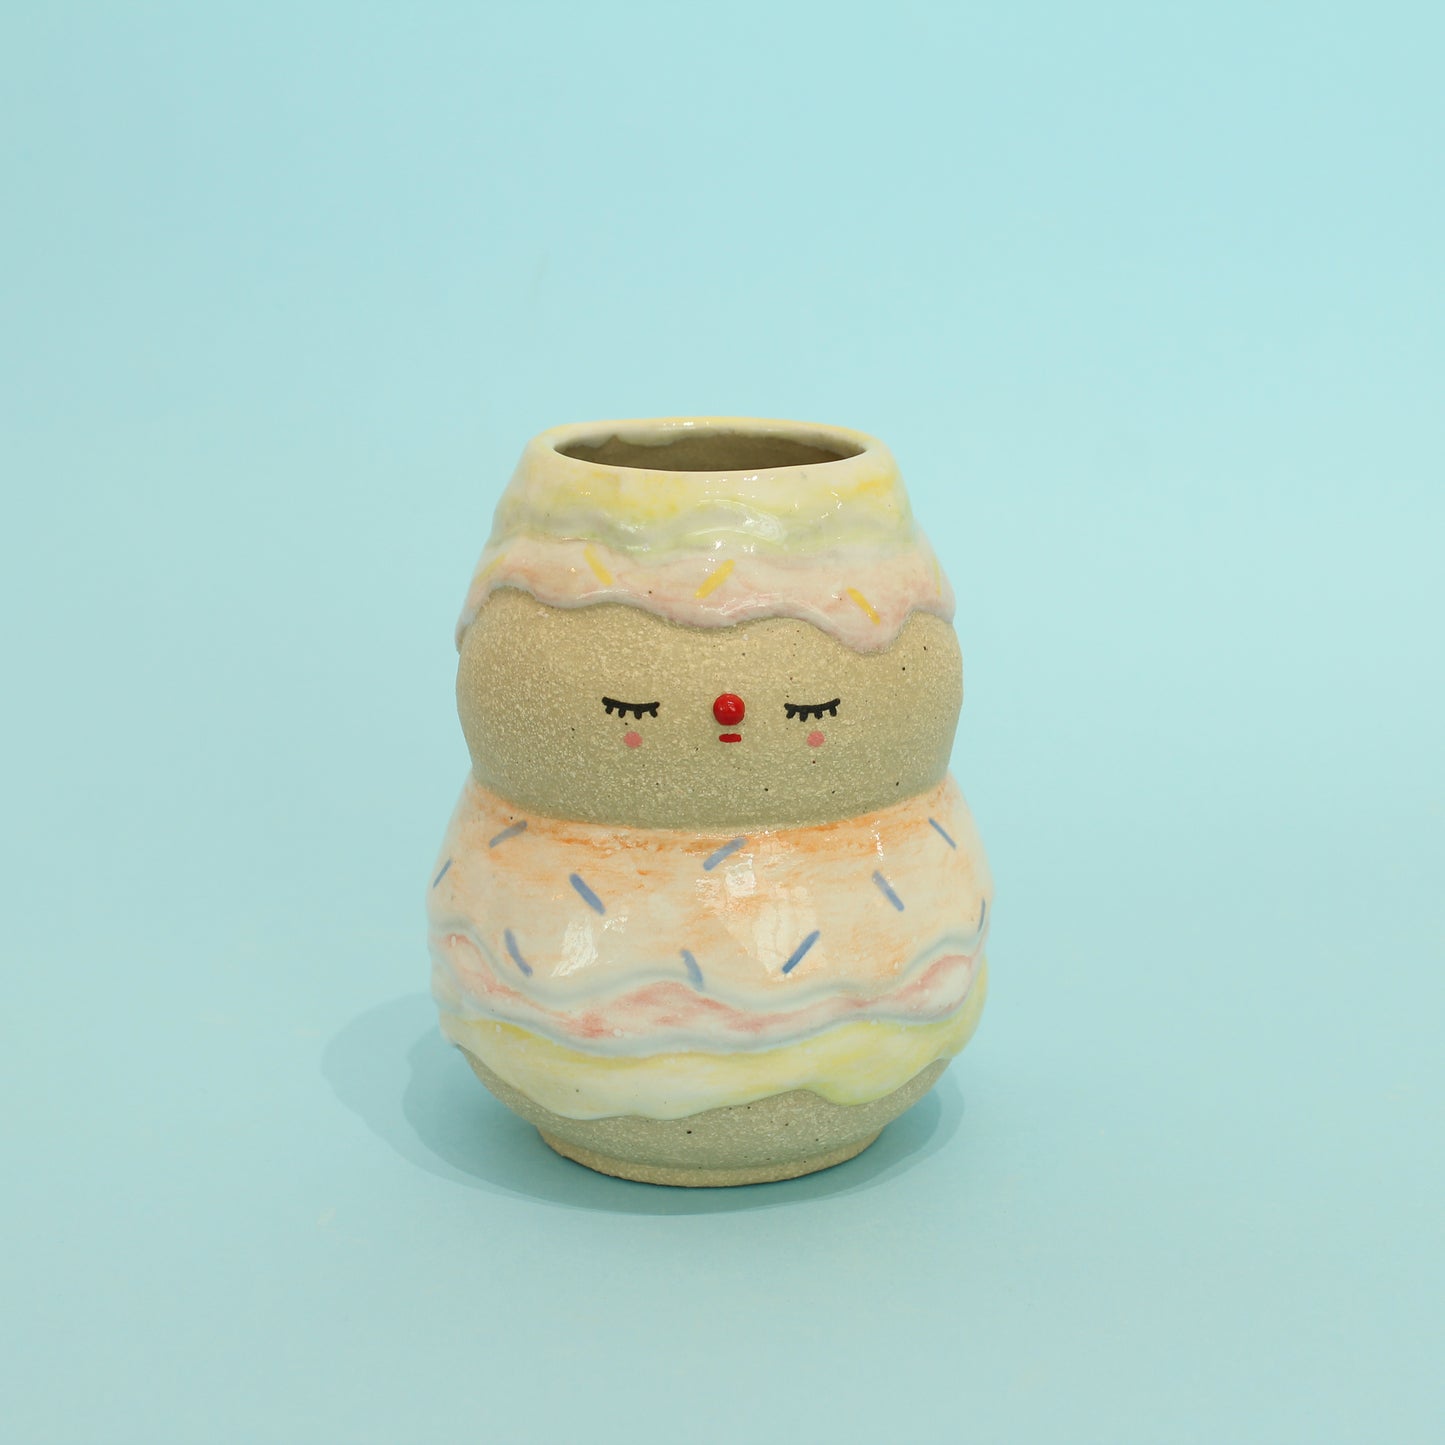 melty pierrot vase one of a kind - cotton candy sundae